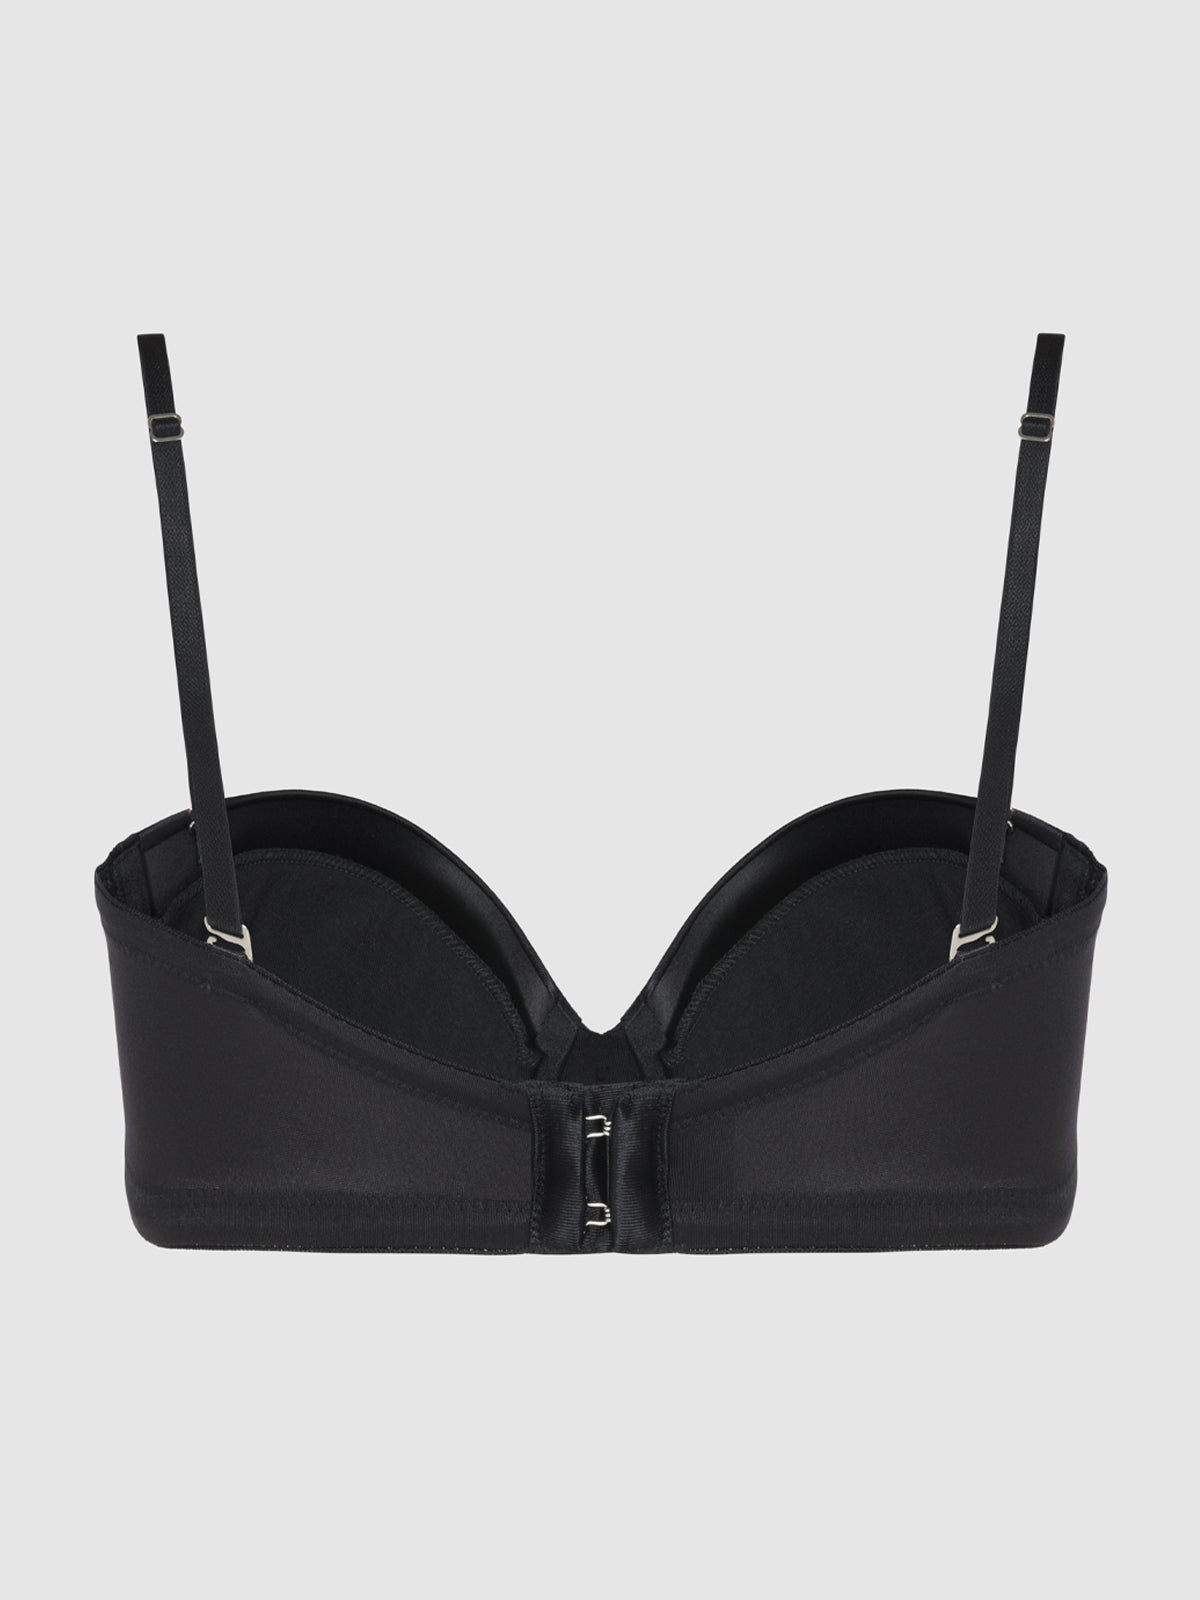 Hollywood Exxtreme Push Up Strapless Bra - Fredericks of Hollywood –  Frederick's of Hollywood